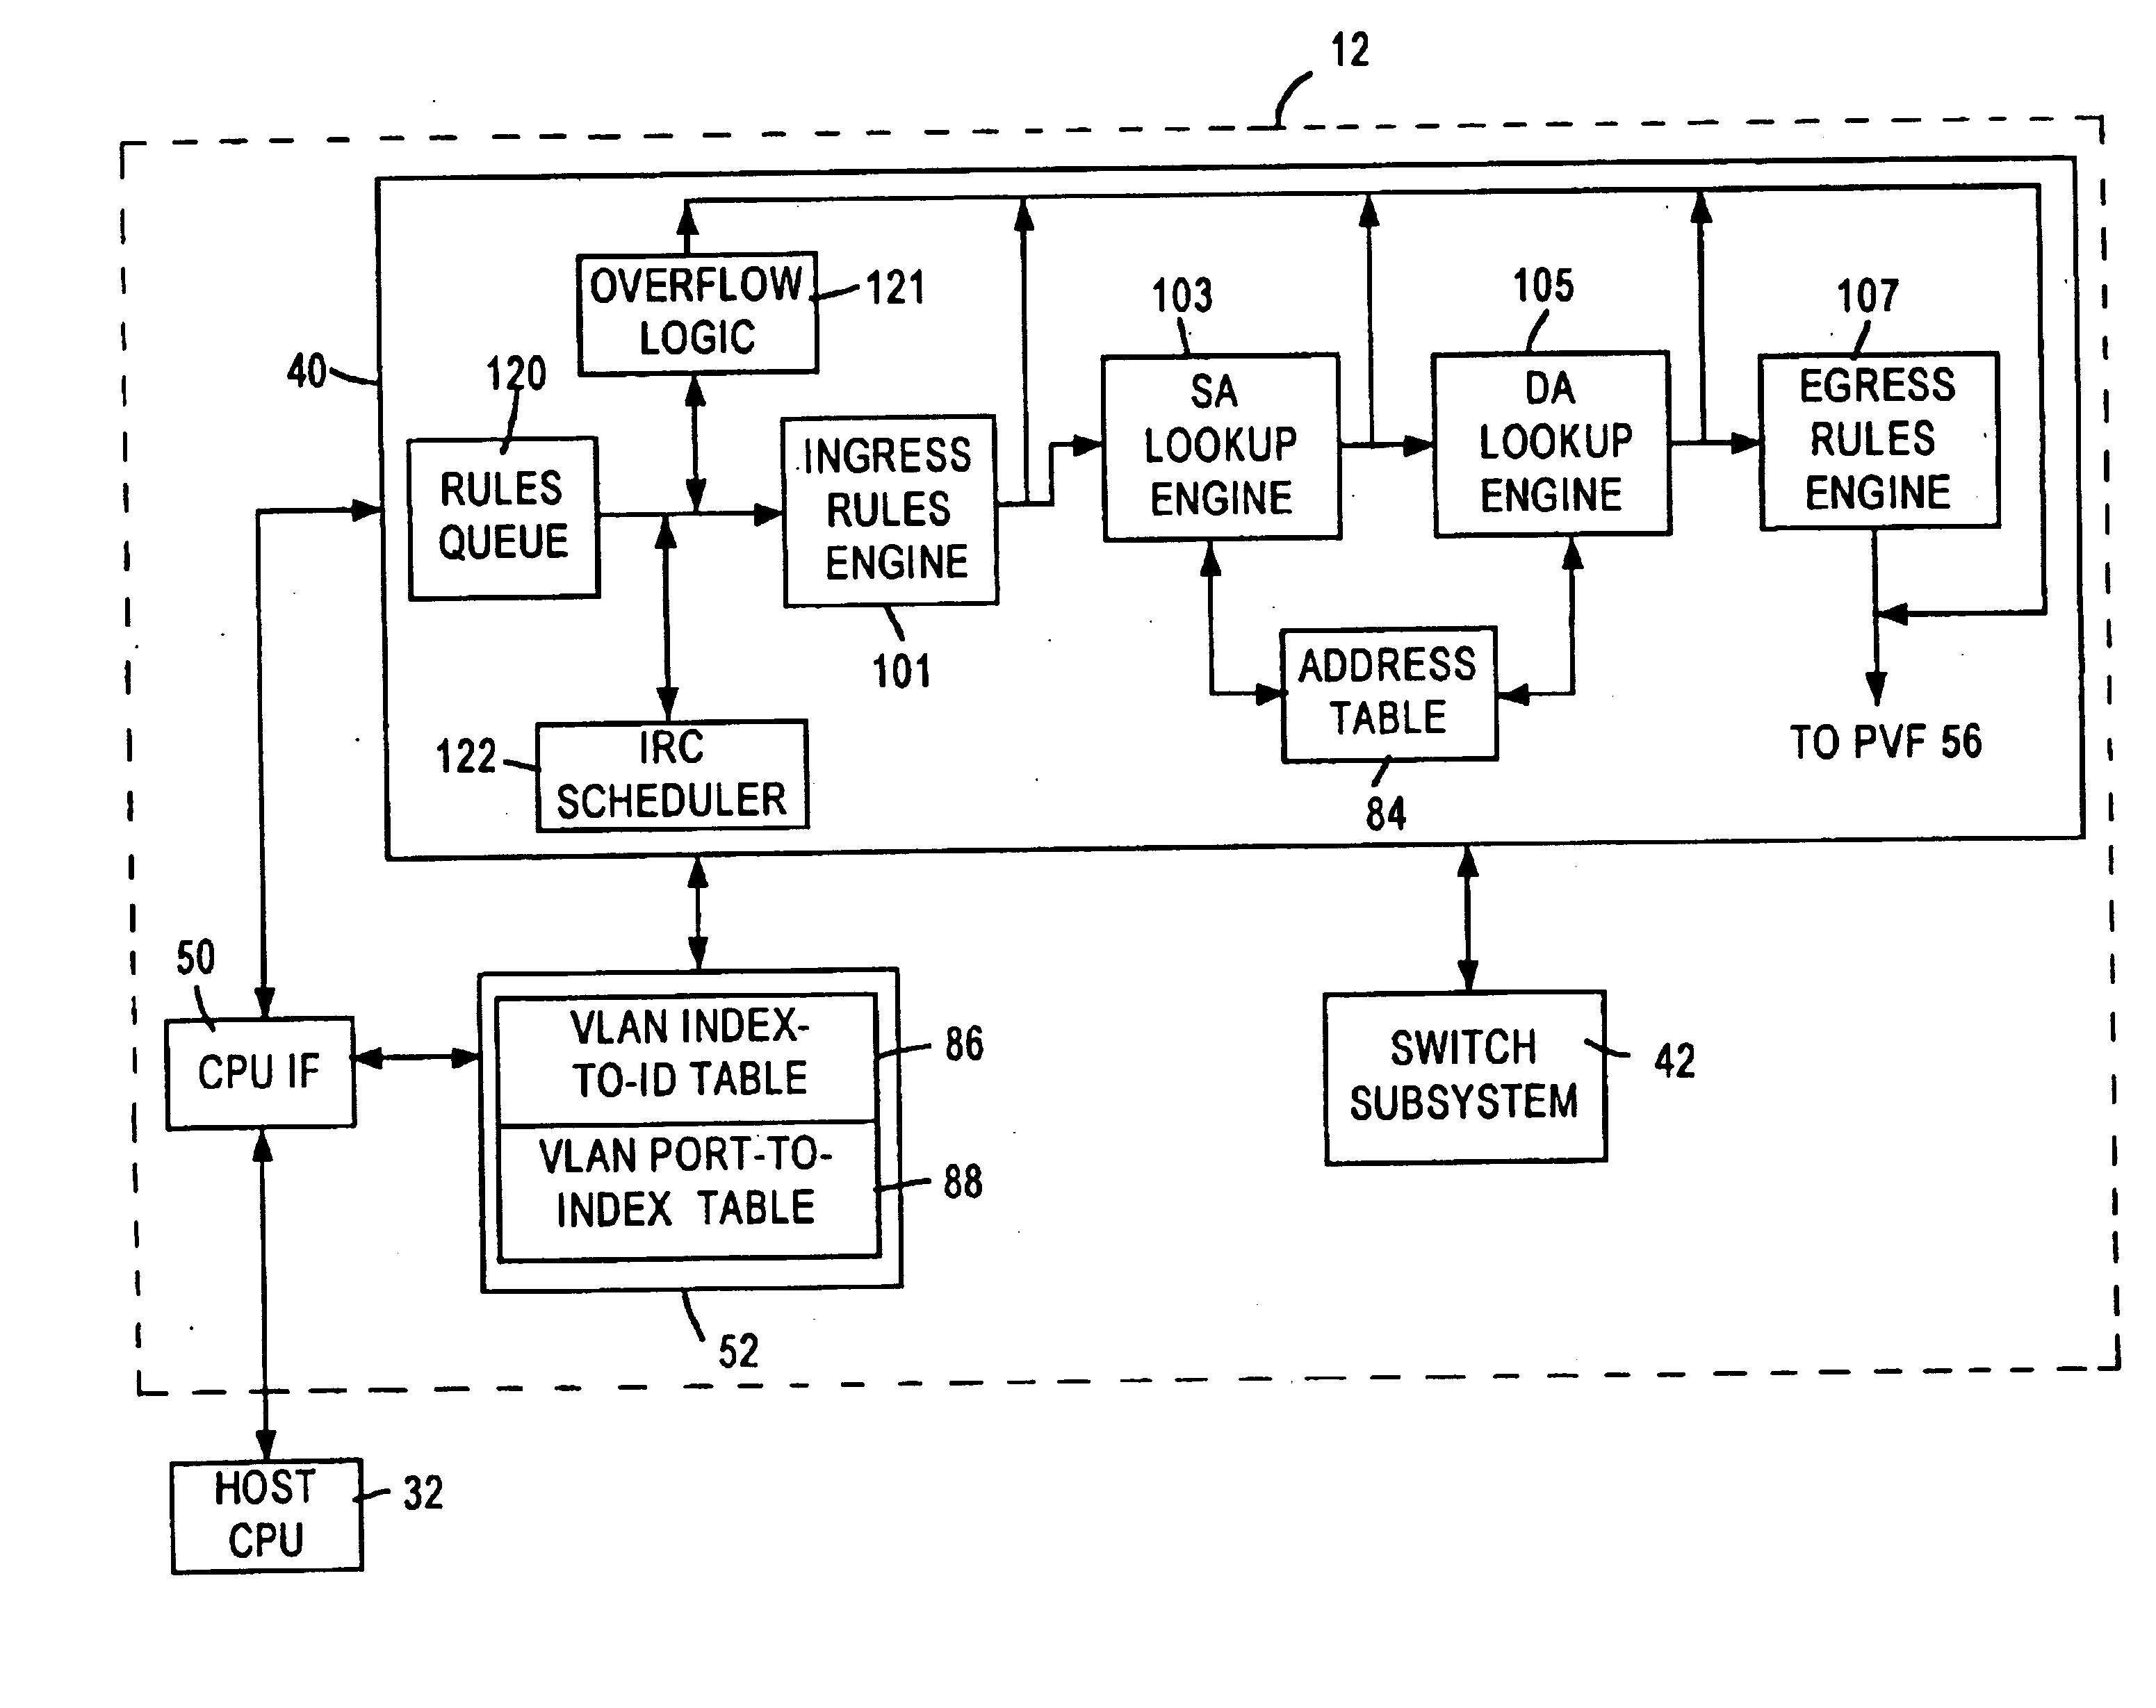 Method and apparatus for improving throughput of a rules checker logic